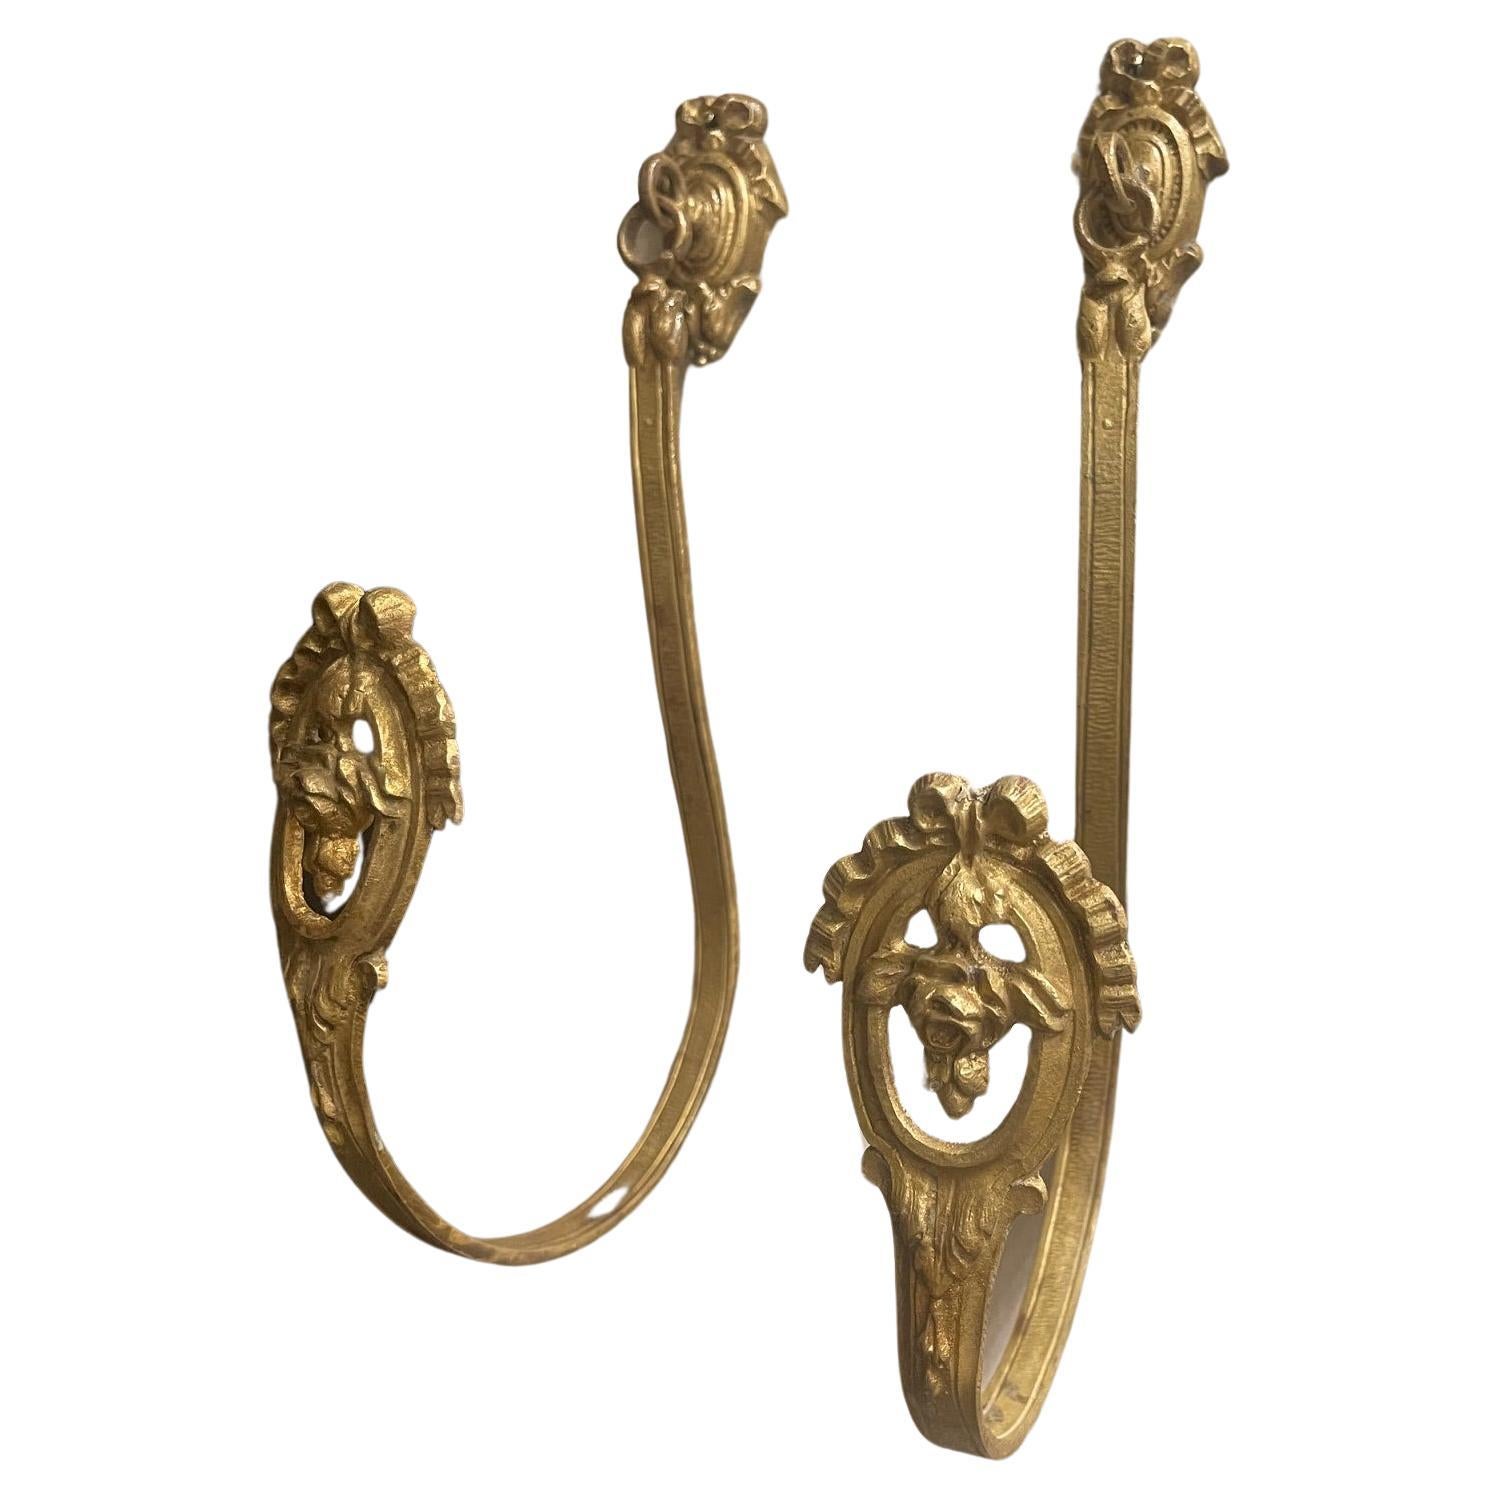 Pair of French Bronze and Brass Curtain Tiebacks or Curtain Holder, 19th Century